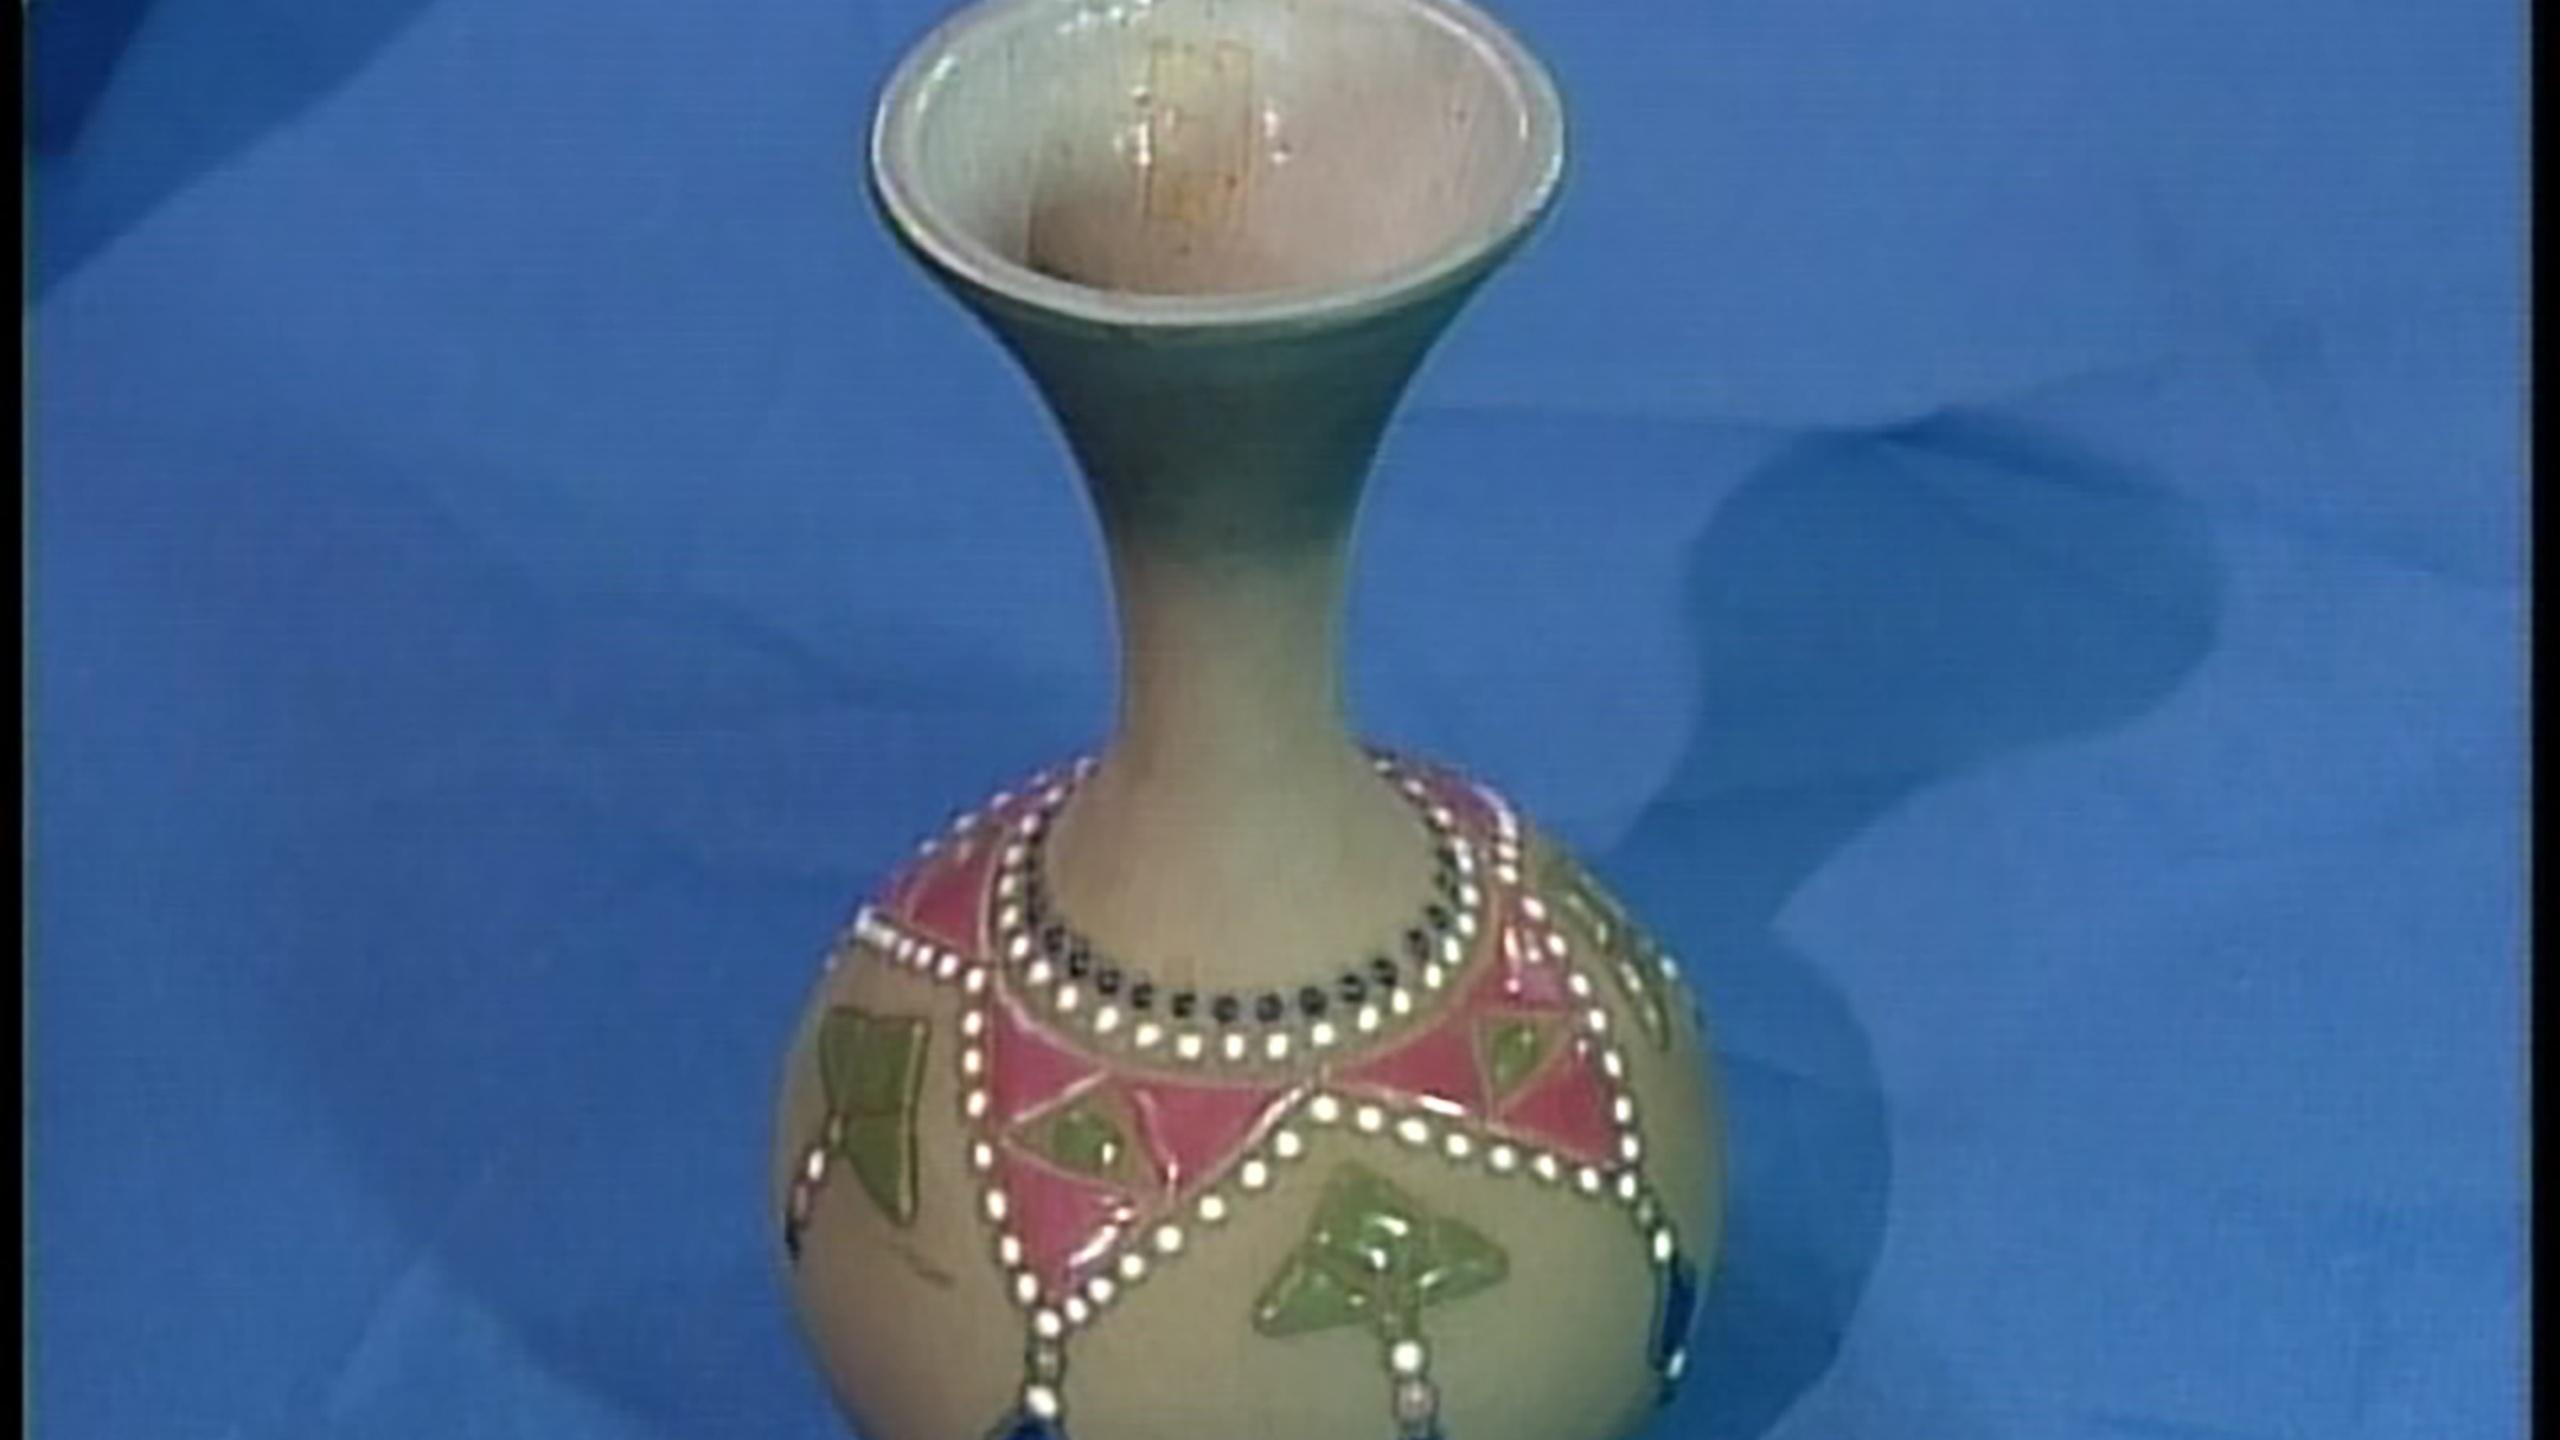 antique chinese vase appraisal of antiques roadshow appraisal 18th century chinese tibetan bowl pertaining to appraisal mccoy porcelain vase ca 1920